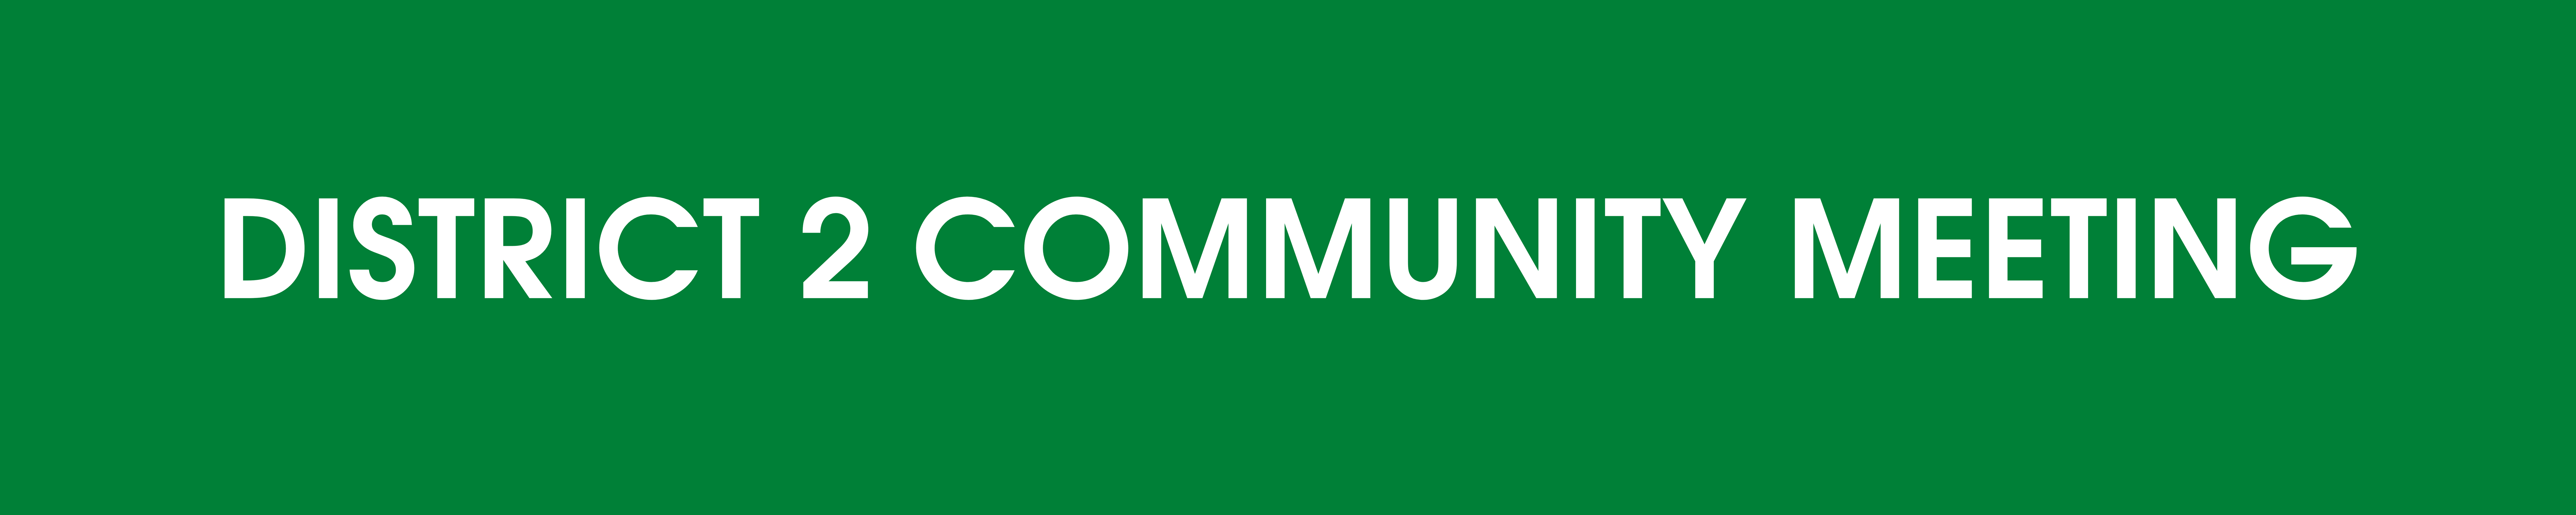 Green Banner, white writing "District 2 Community Meeting"